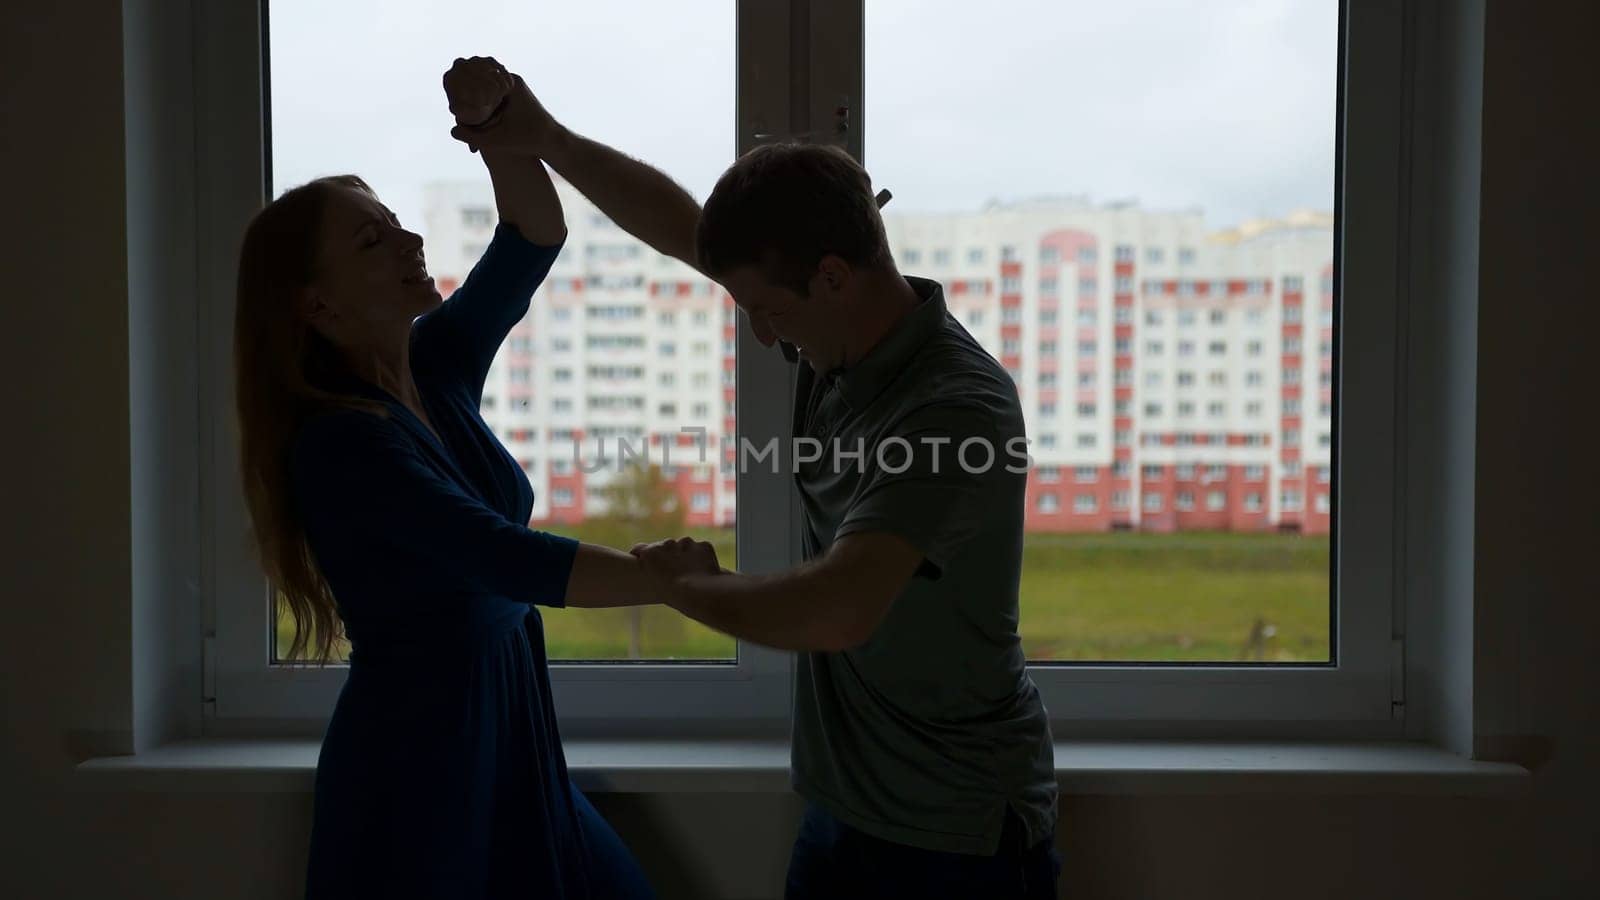 The silhouette of the young spouses swearing and fighting, but then reconciliation